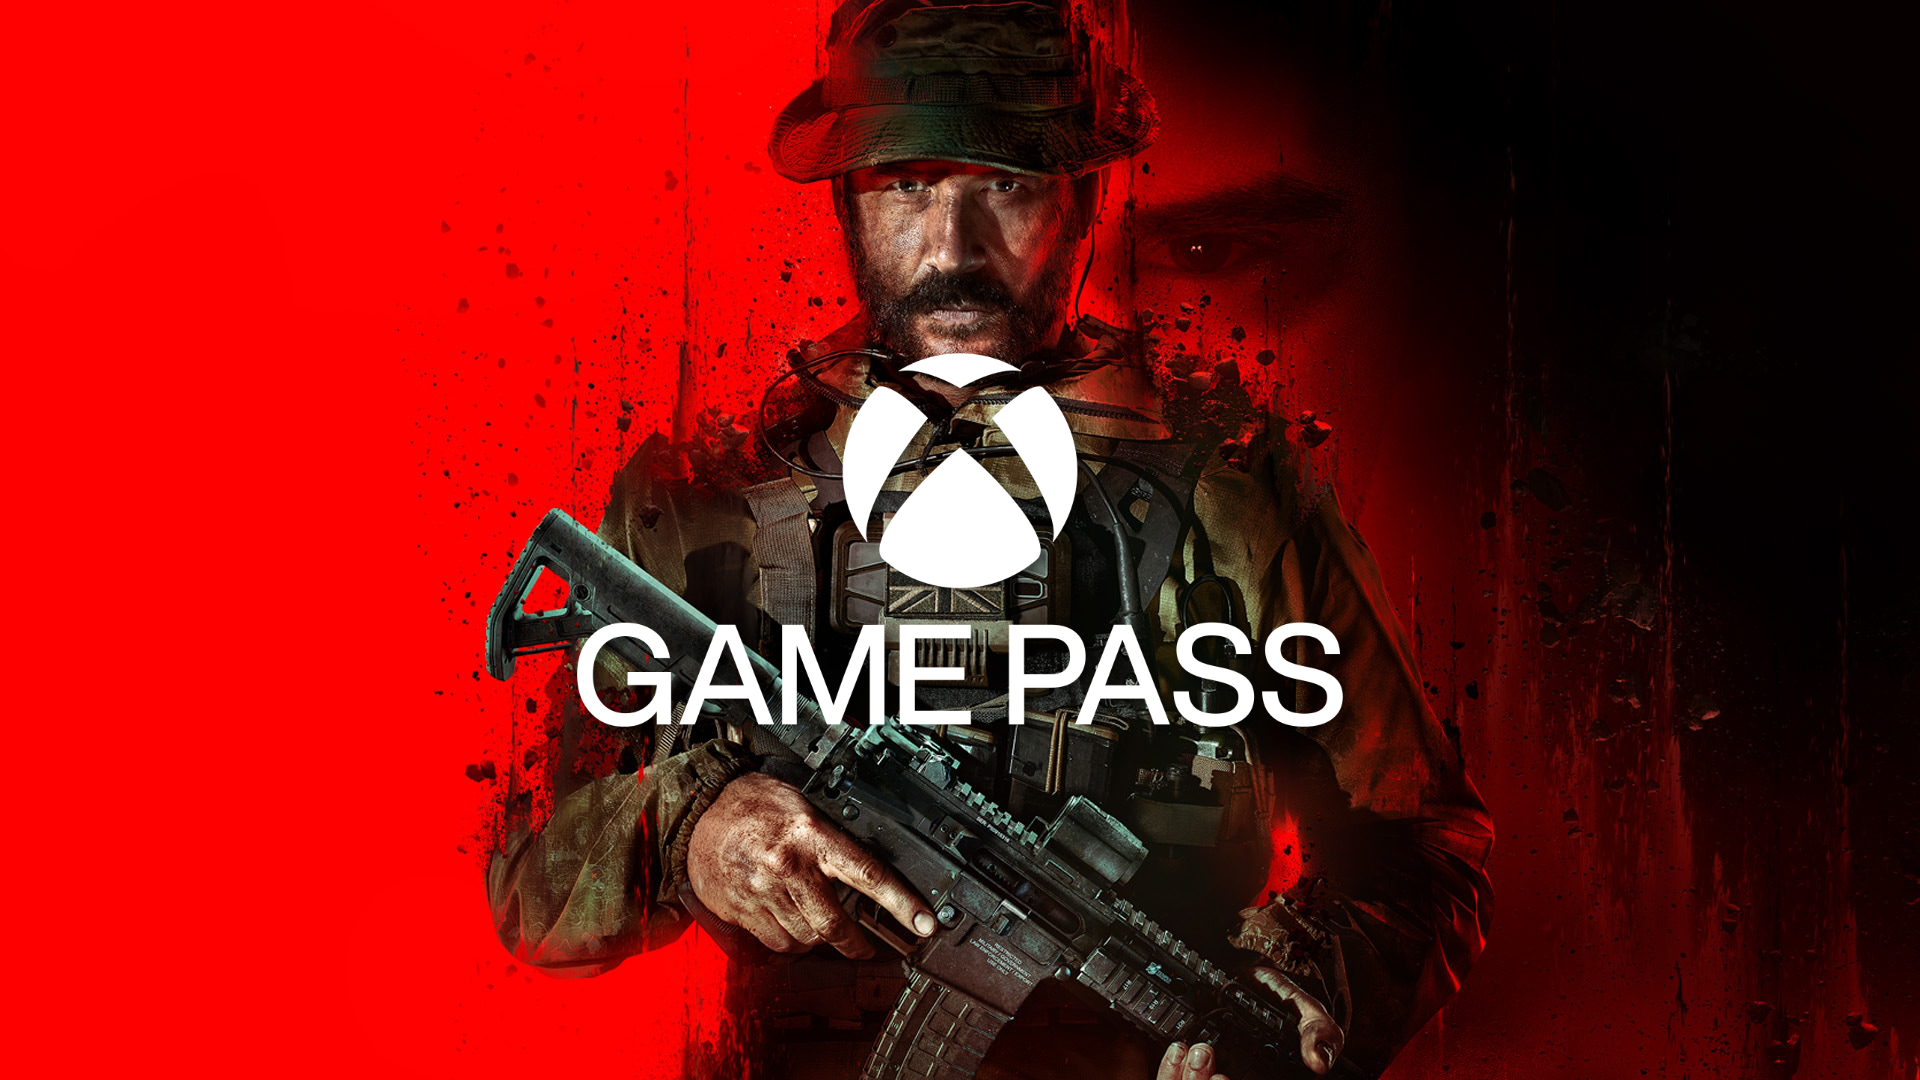 When will Activision Blizzard games be added to Game Pass